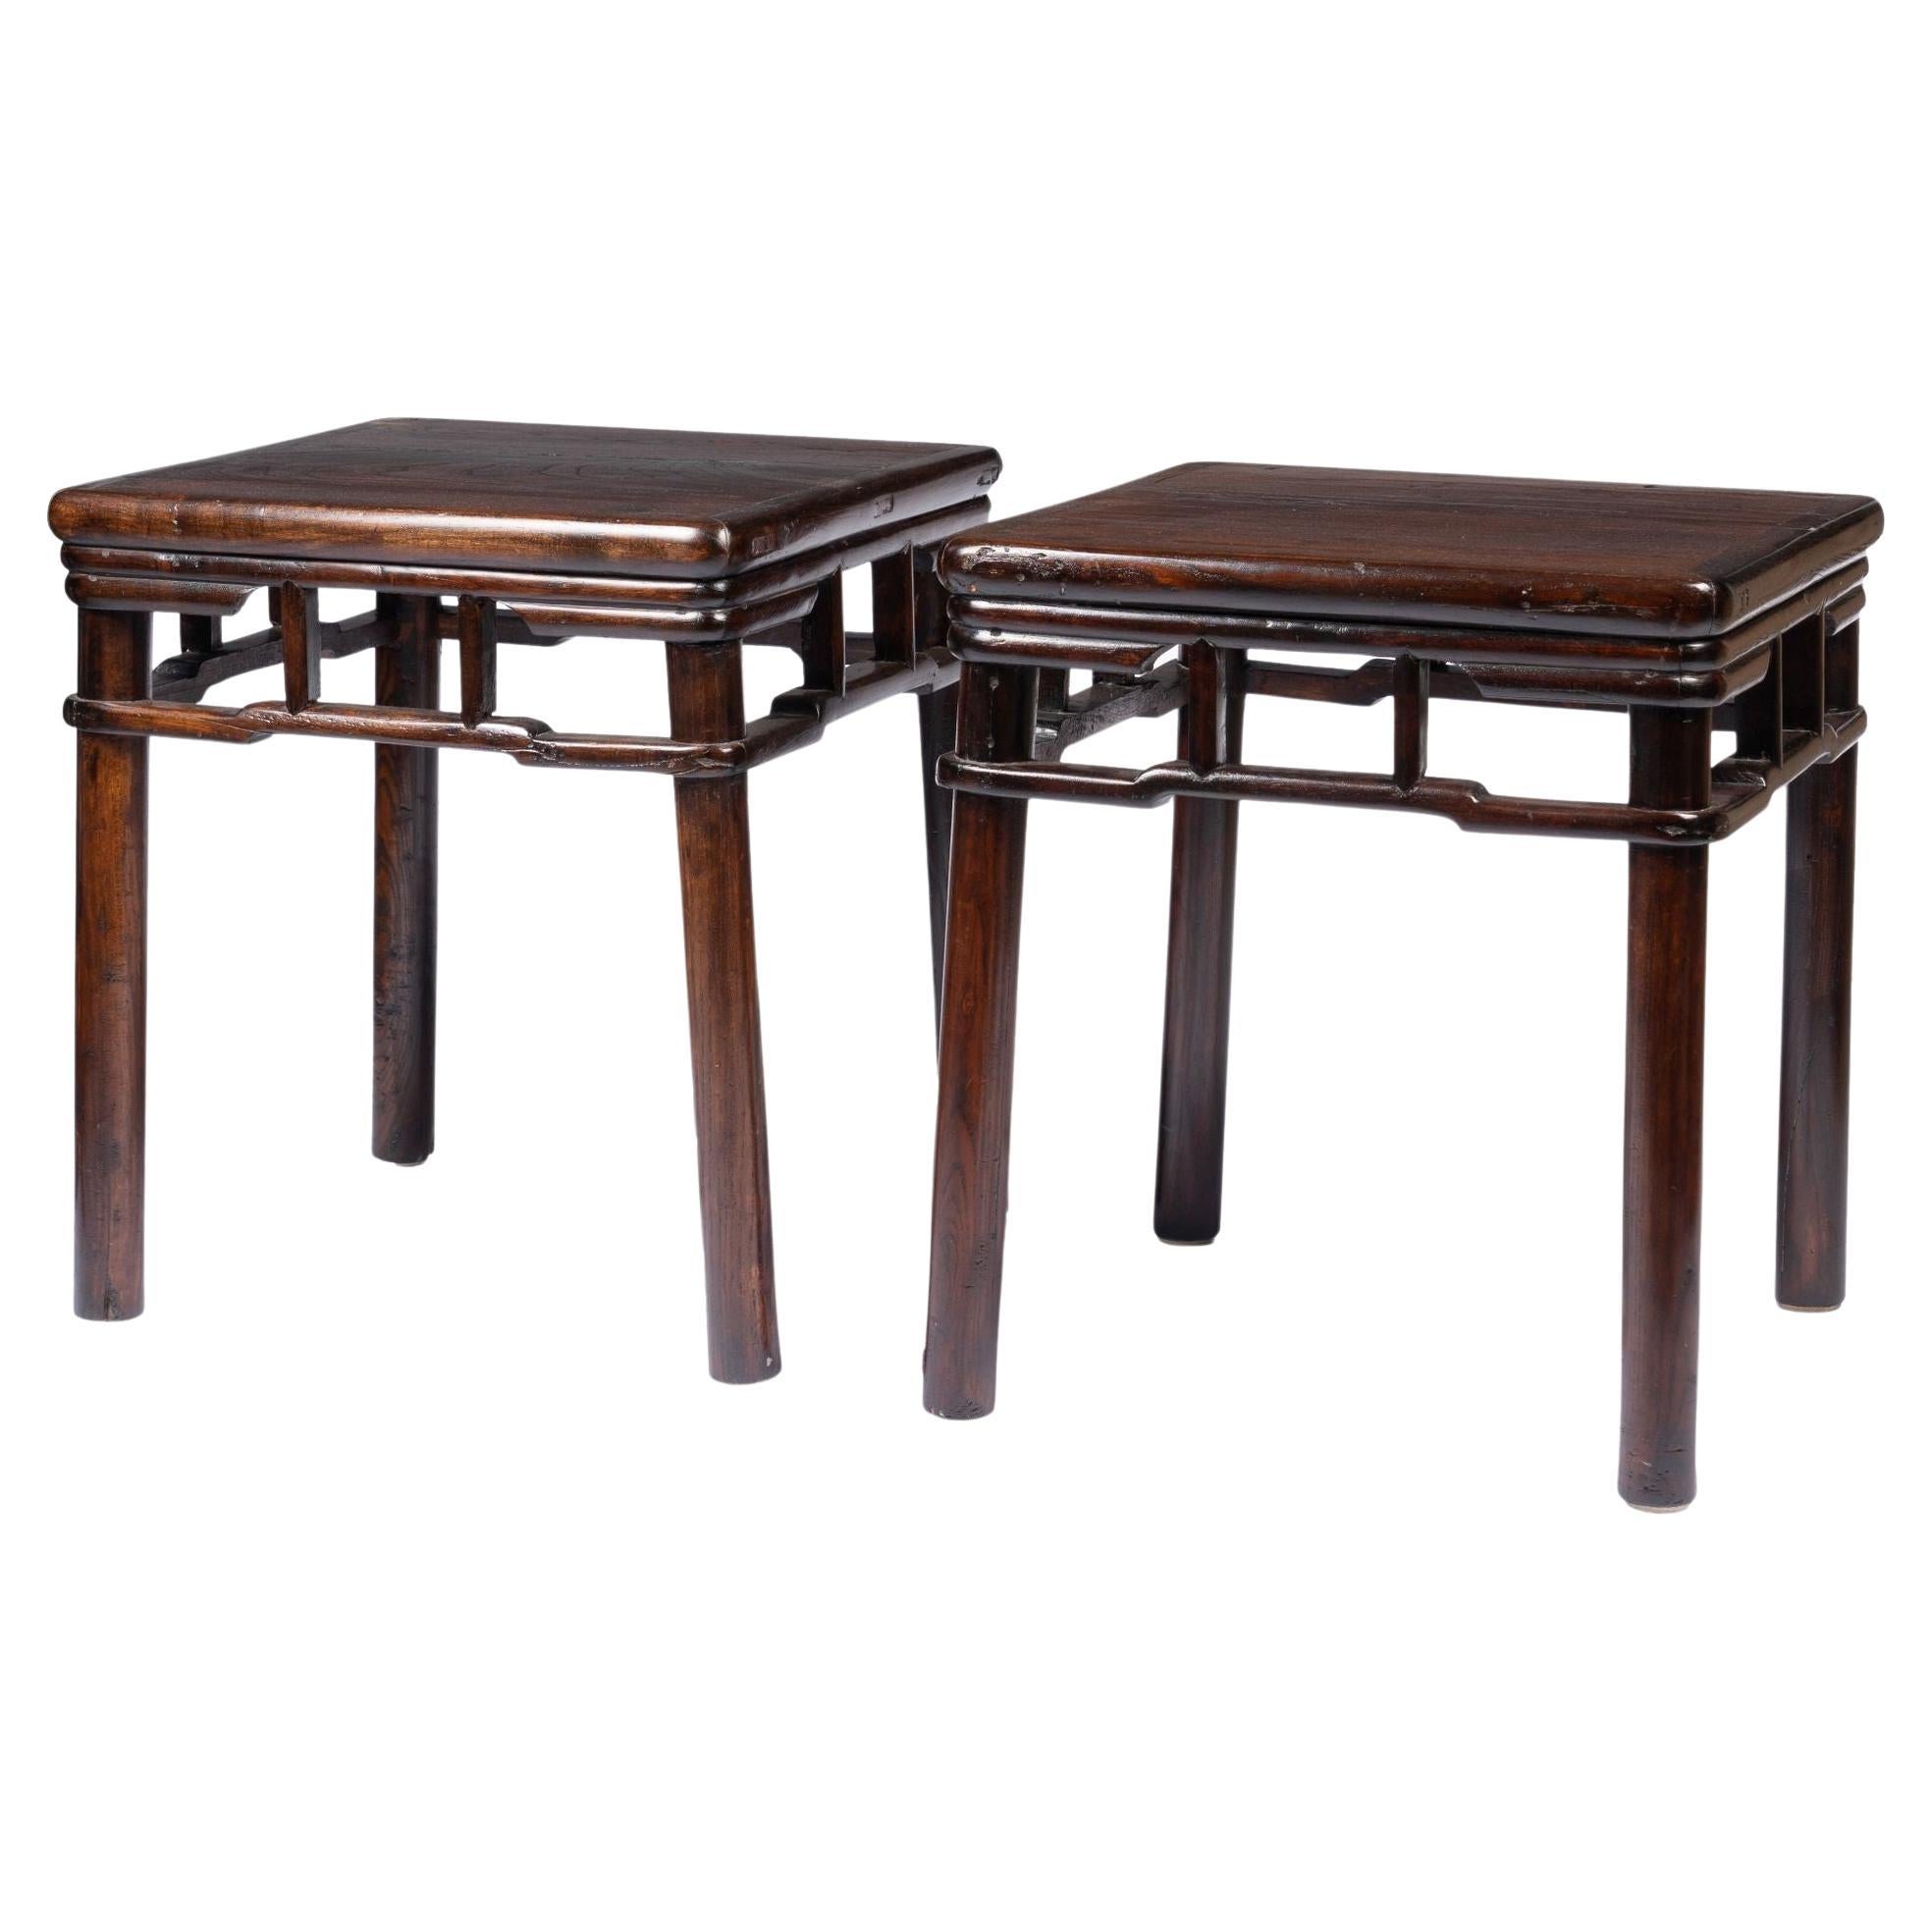 Pair of Chinese Elm Stools with Hump Back Rail, 1780-1820 For Sale